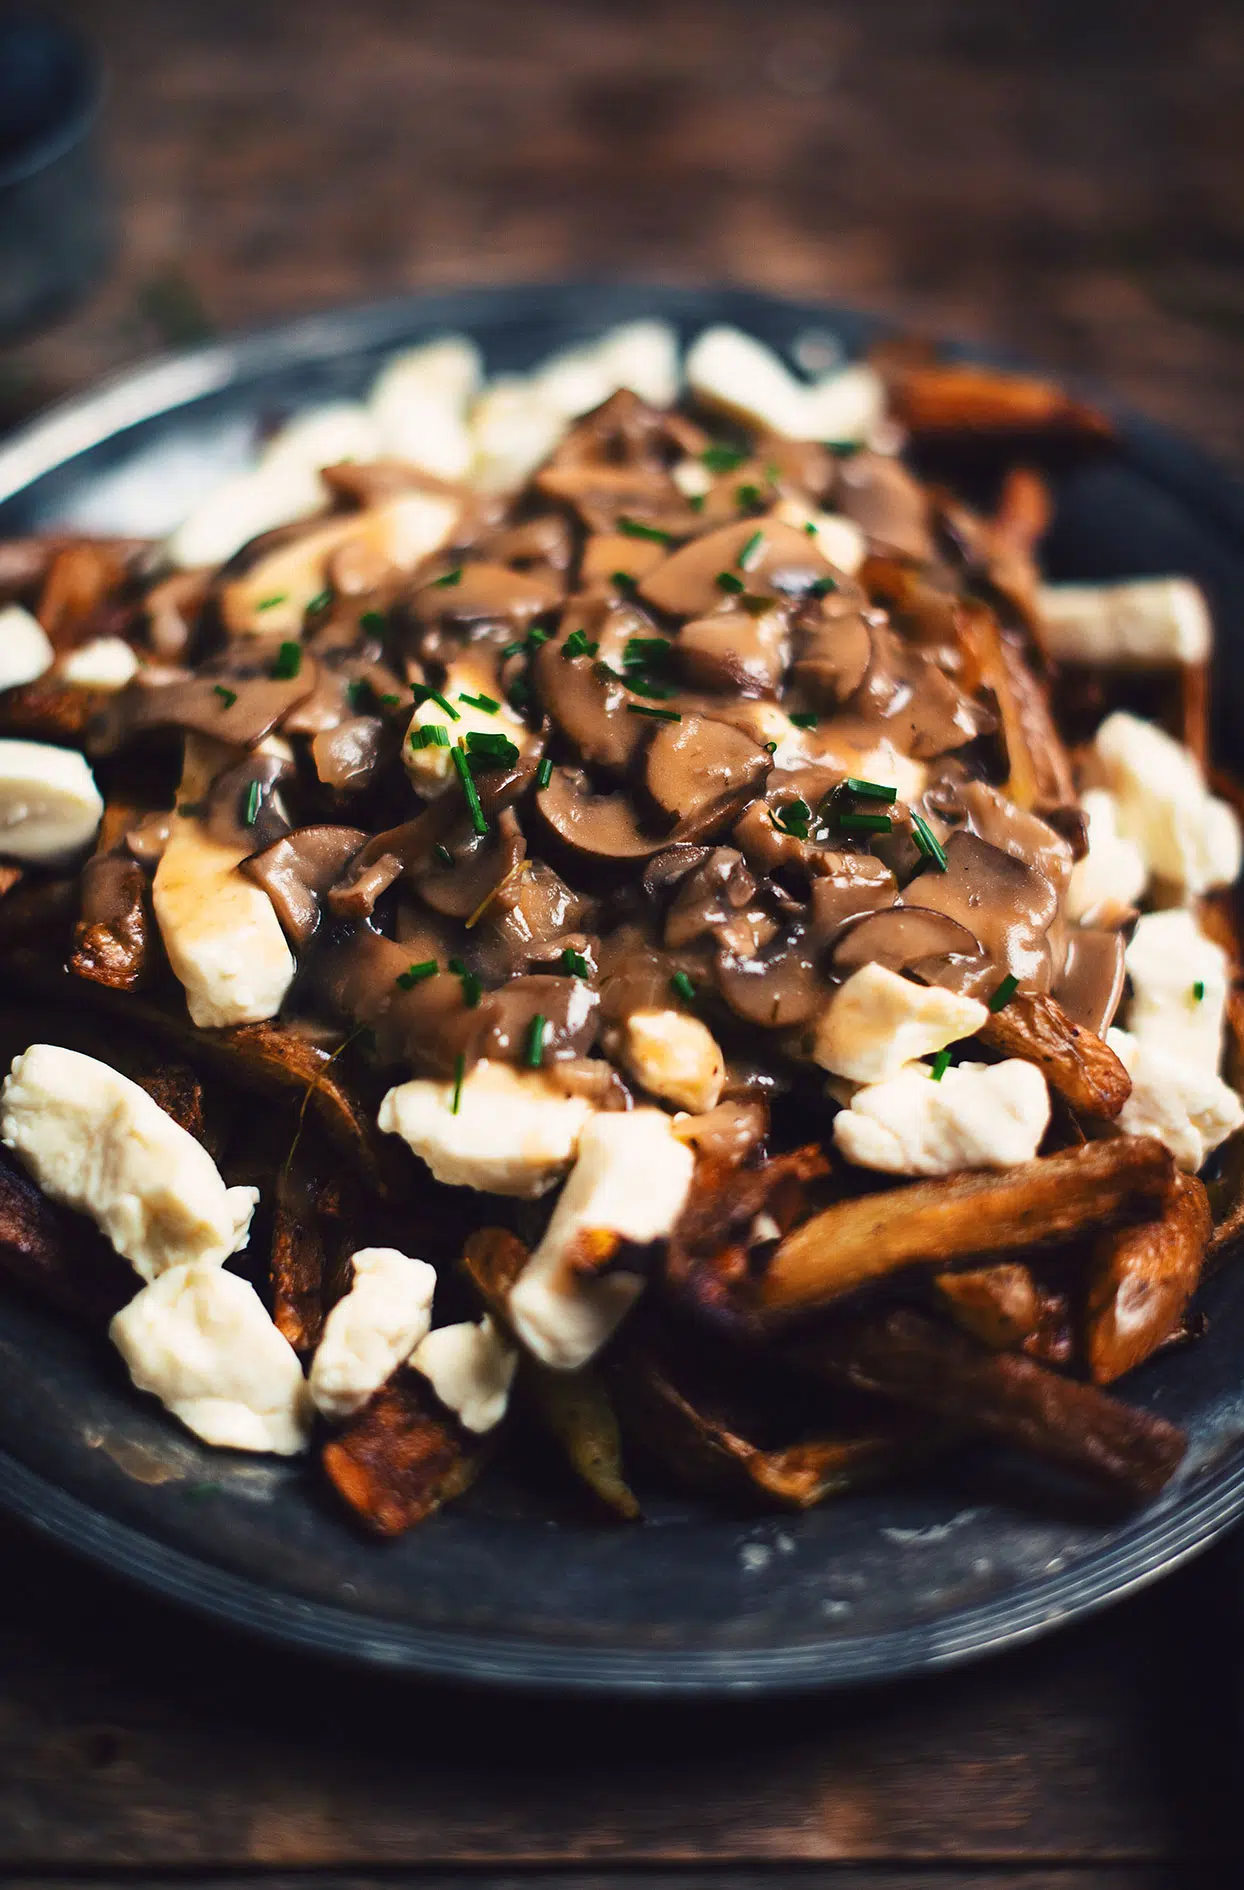 Poutine with wild mushrooms and beer brown sauce